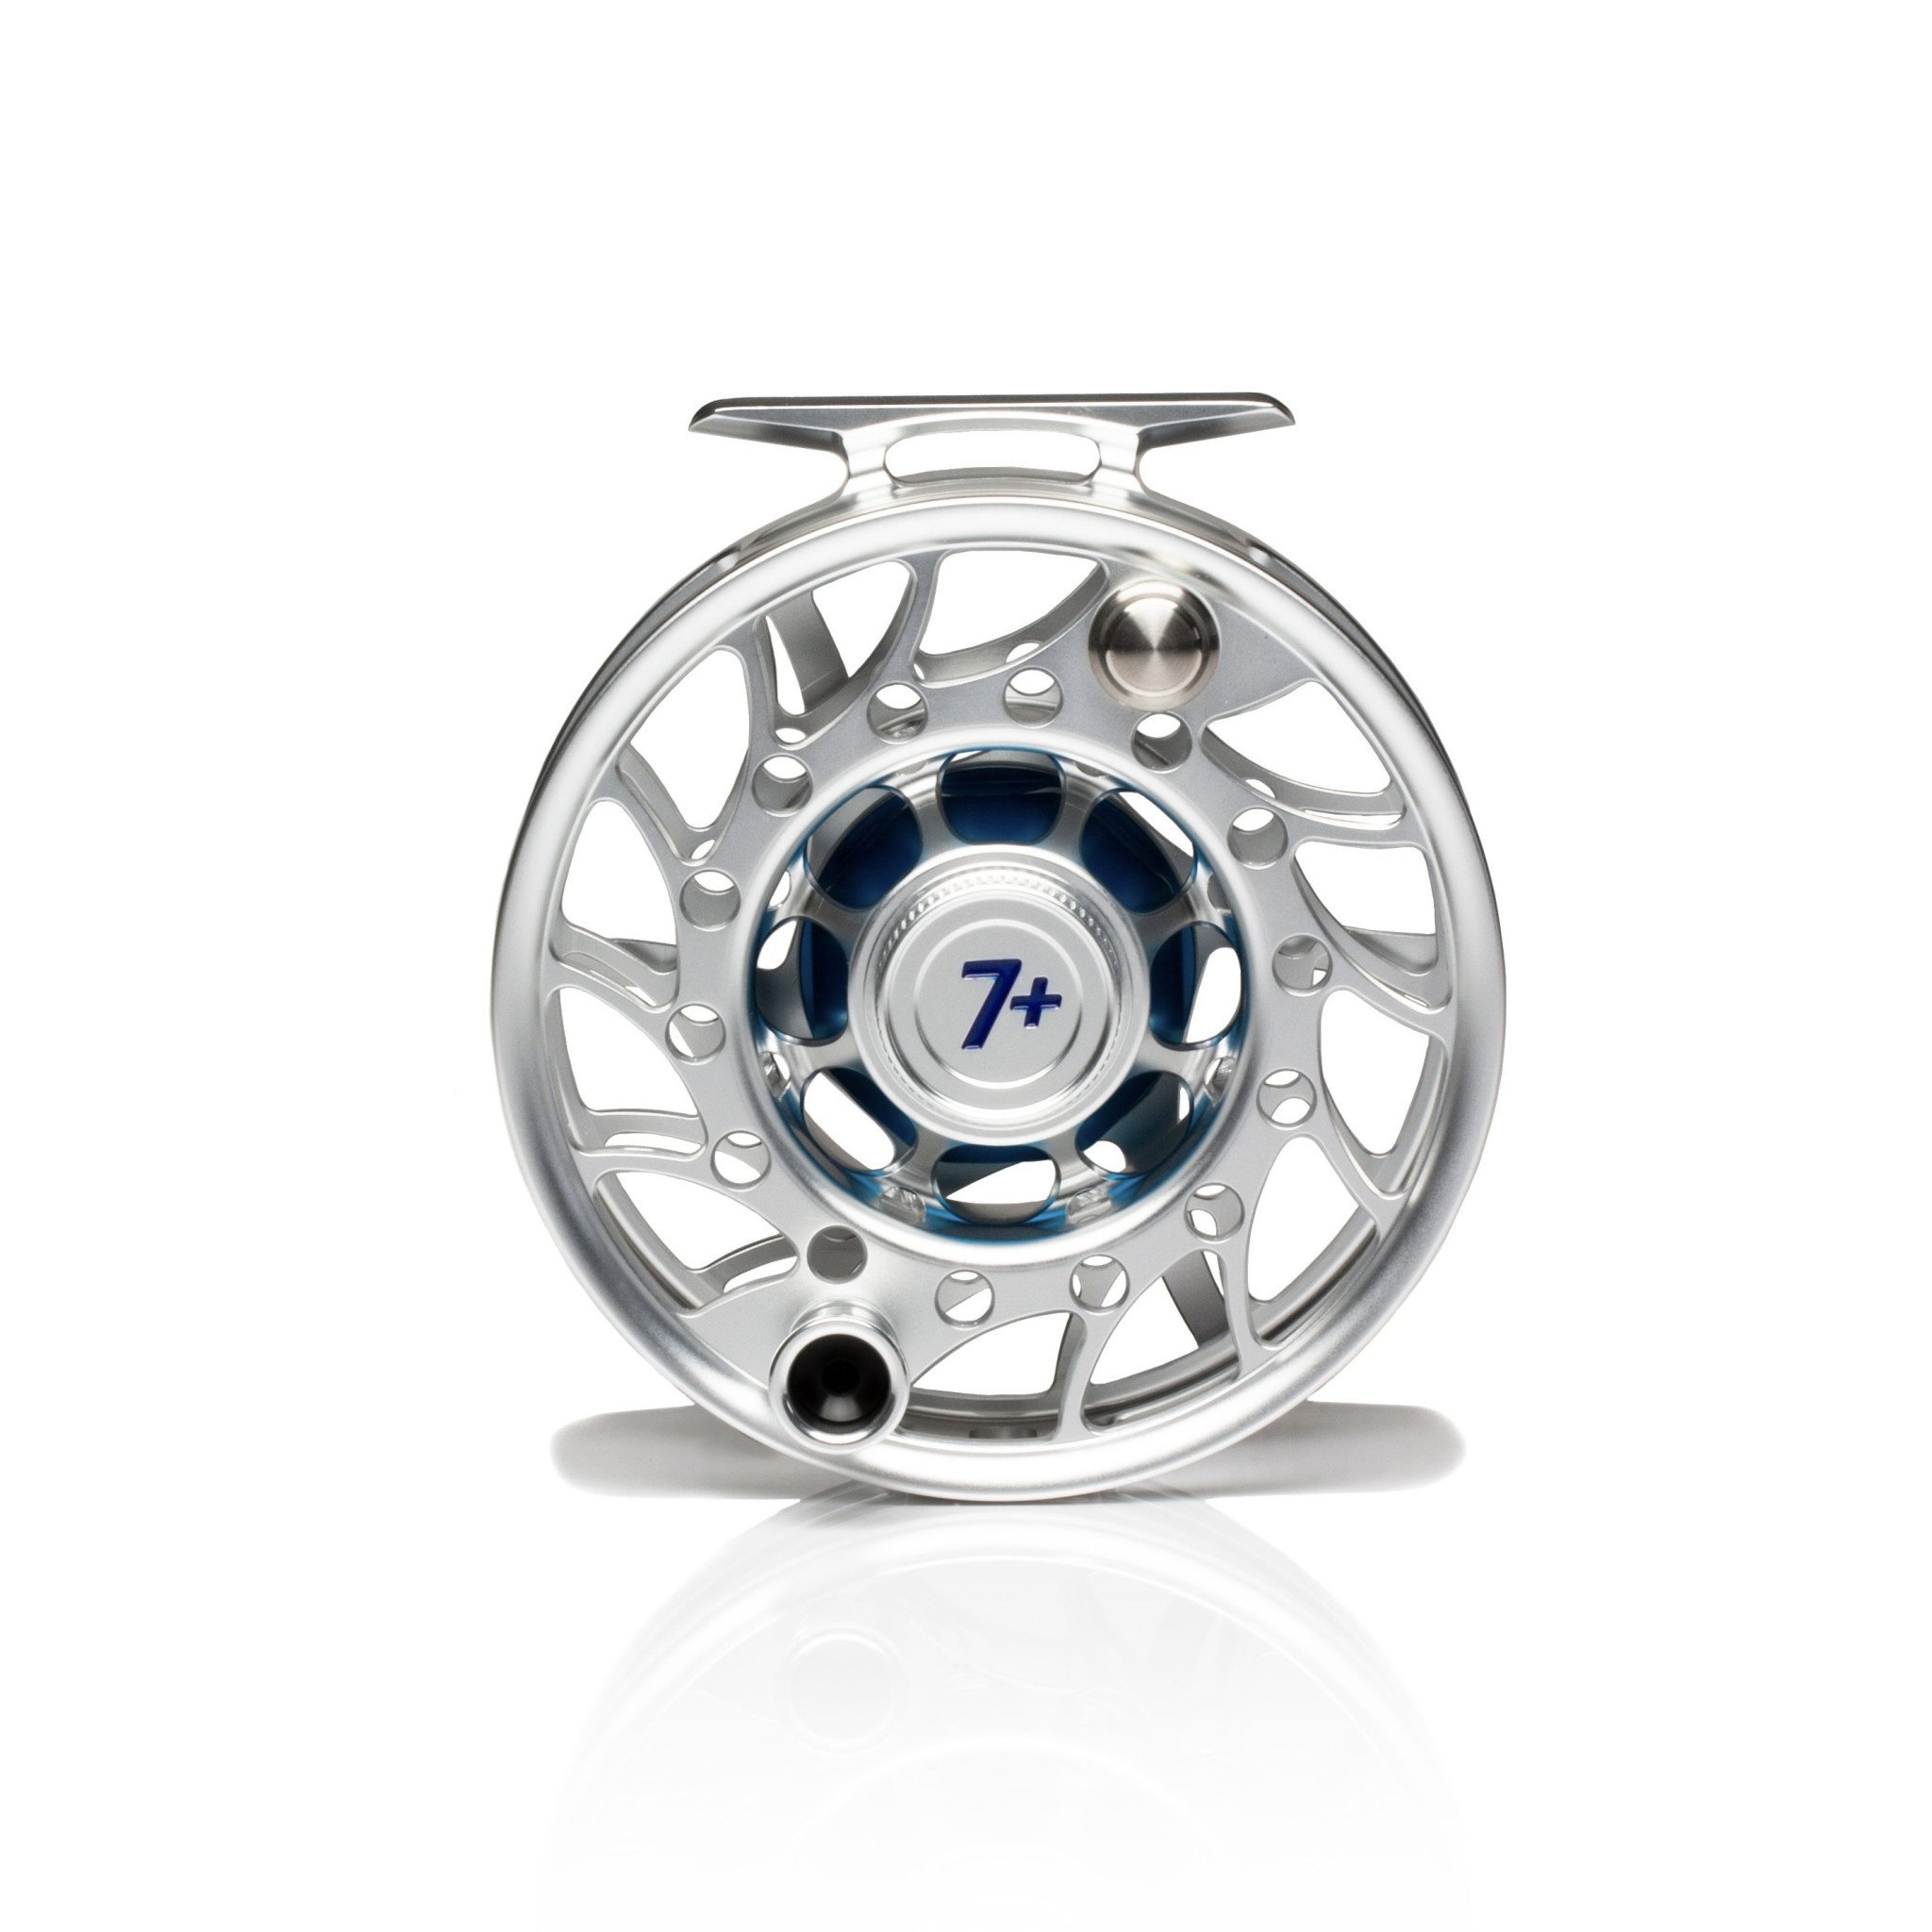 Hatch Iconic Reel - Royal Treatment Fly Fishing